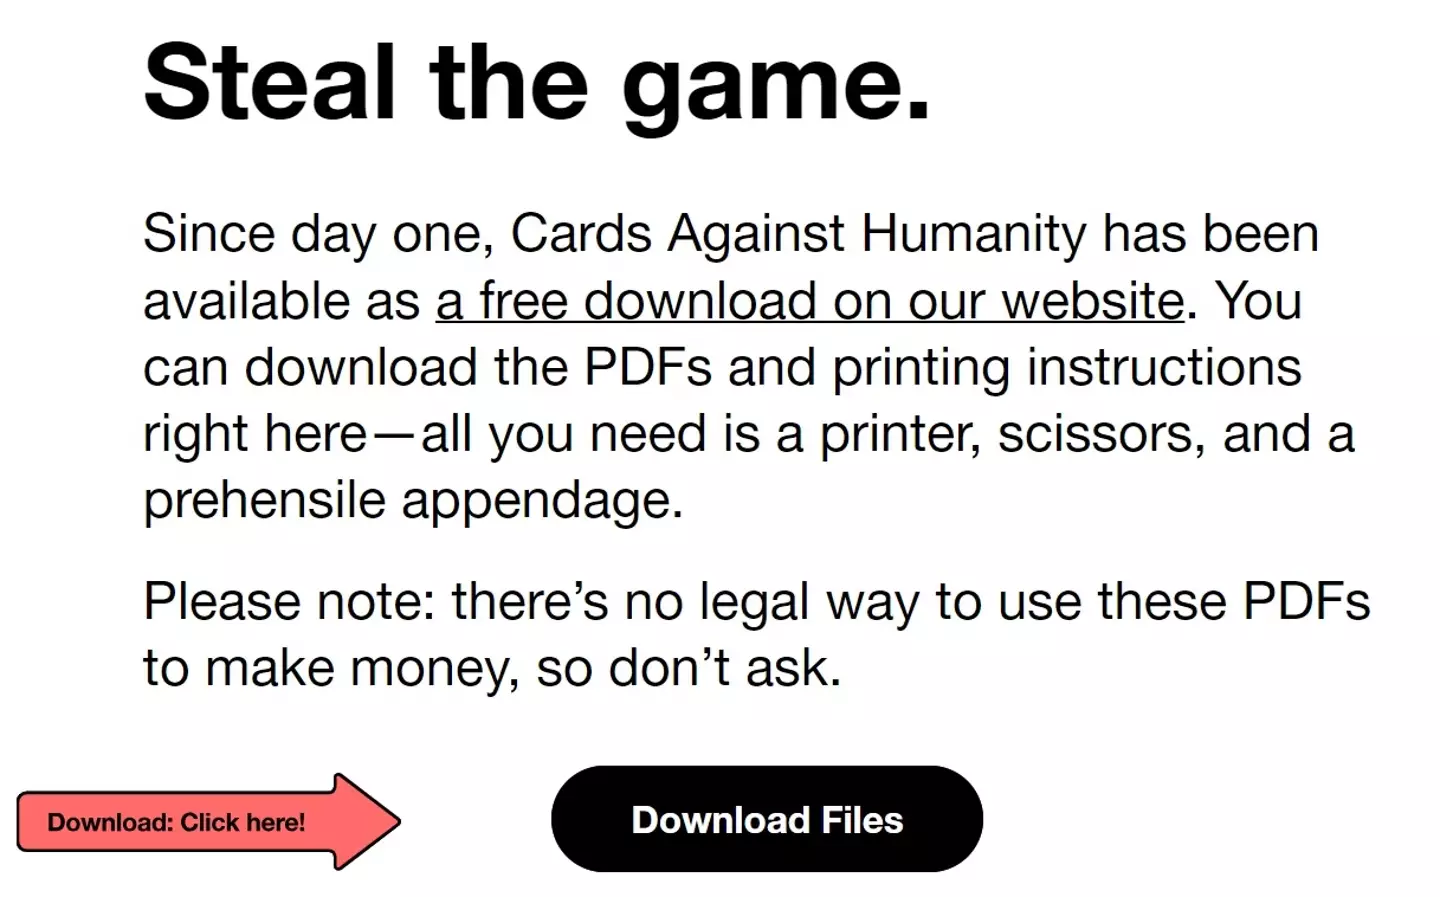 If you'd prefer to print out the game yourself you can just download it from their website.